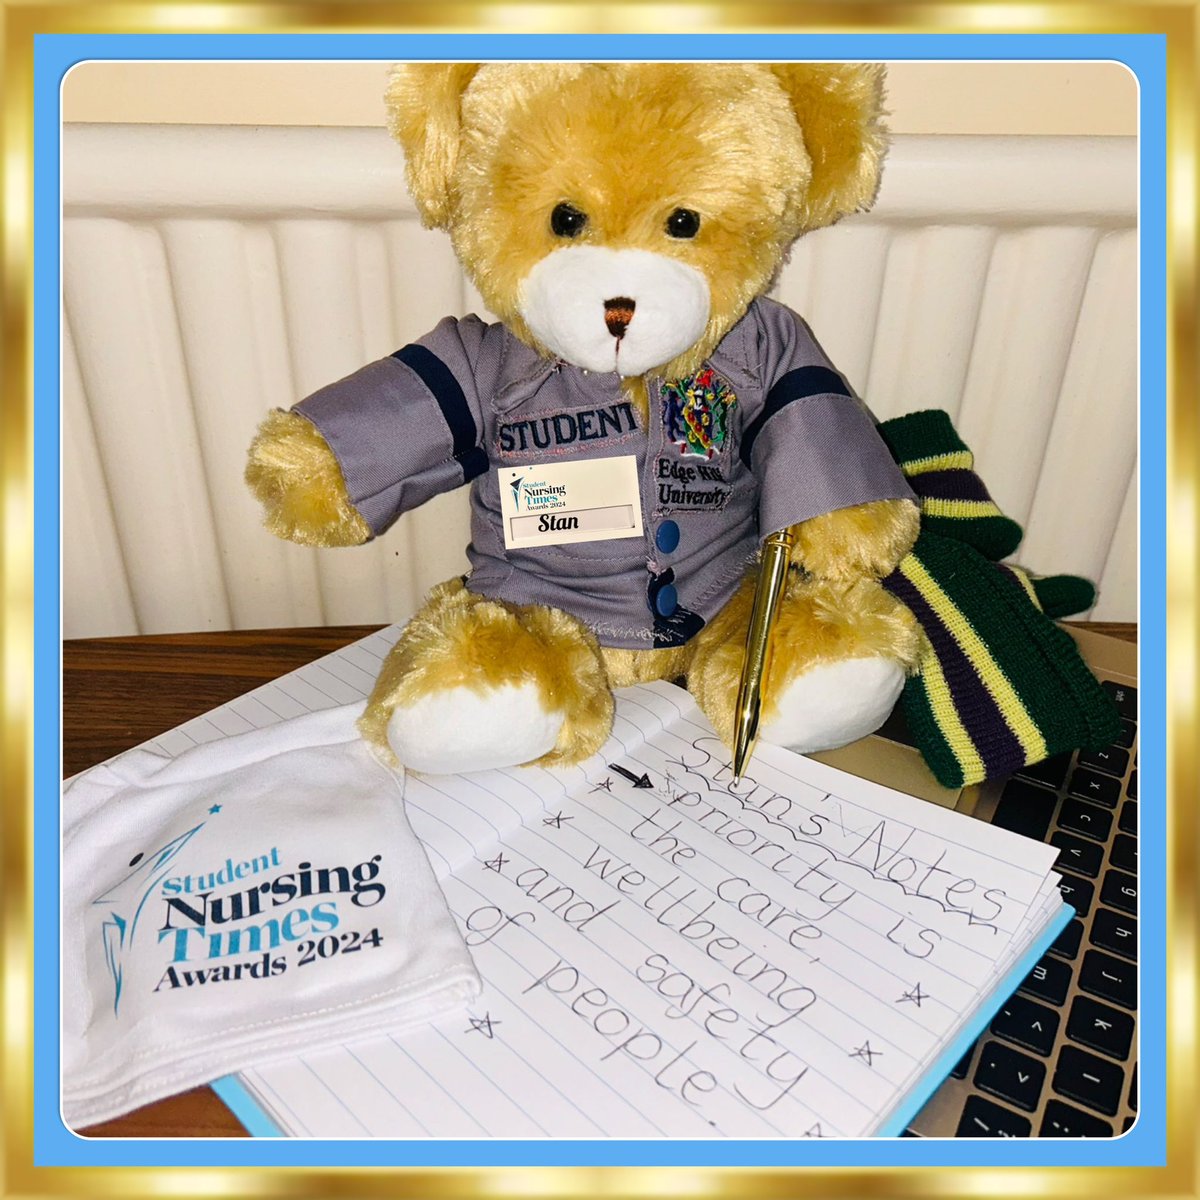 Here is our busy student STAN. He is working hard before he goes to The Student Nursing Times Awards @NursingTimes #SNTABear